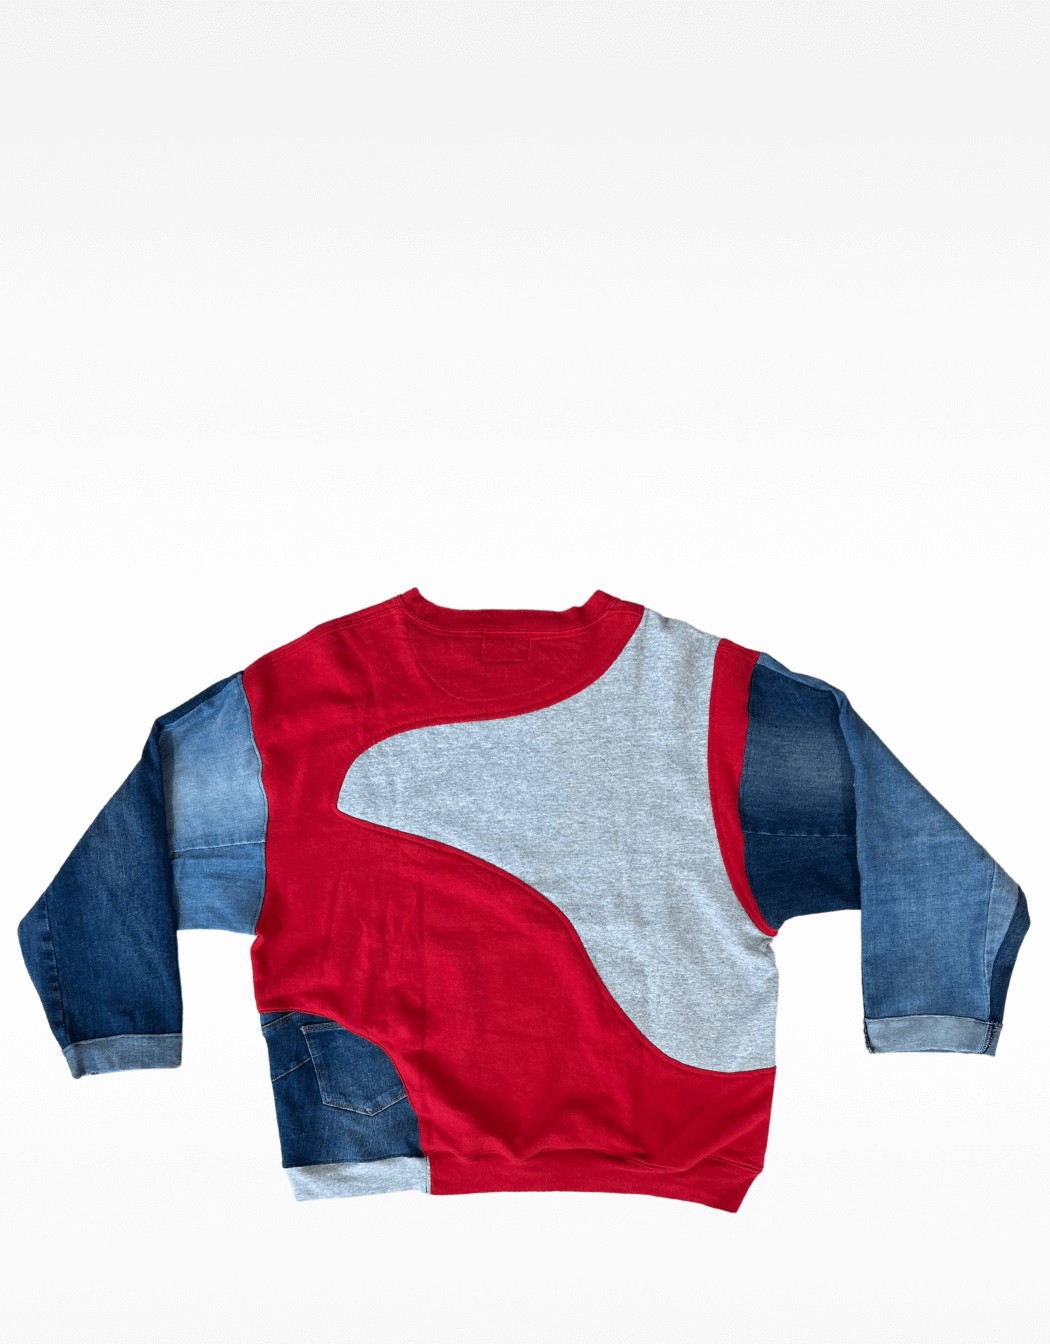 sweat-rework-jeans-upcycling-starter-2ndechance-dos